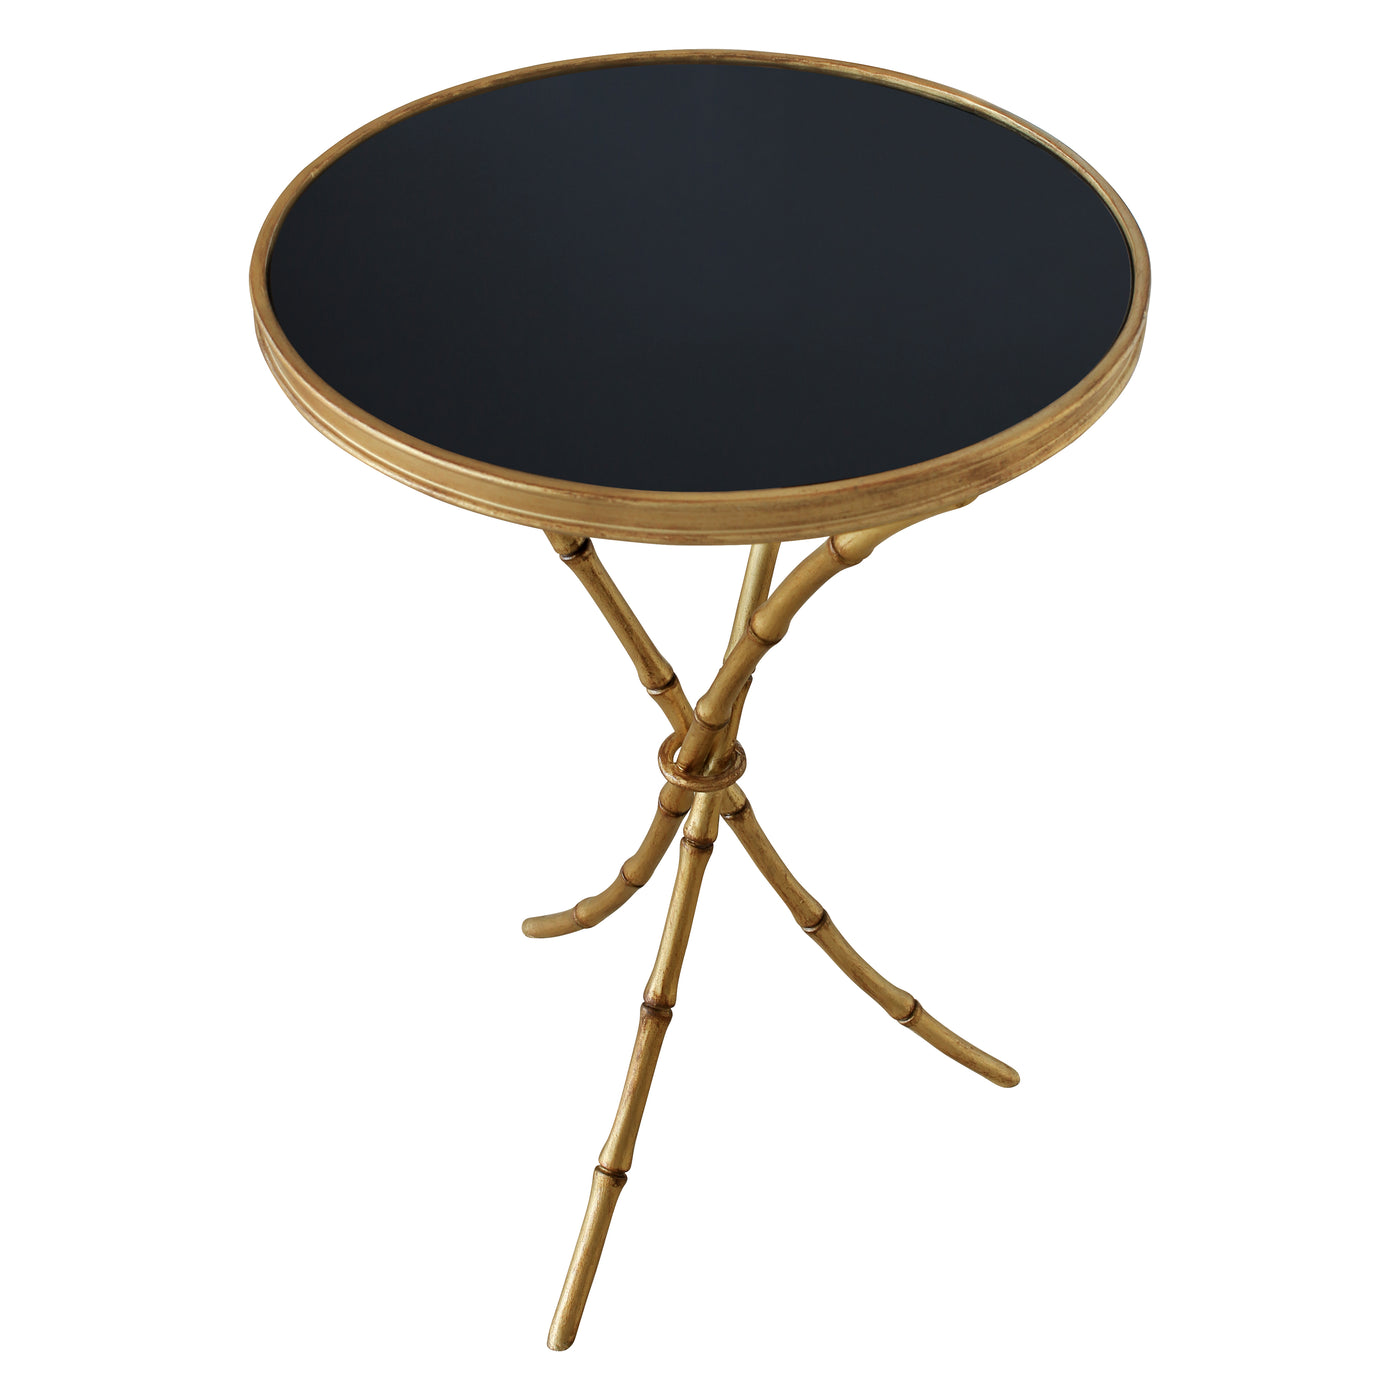 Contemporary end table with golden bamboo legs and back painted glass top